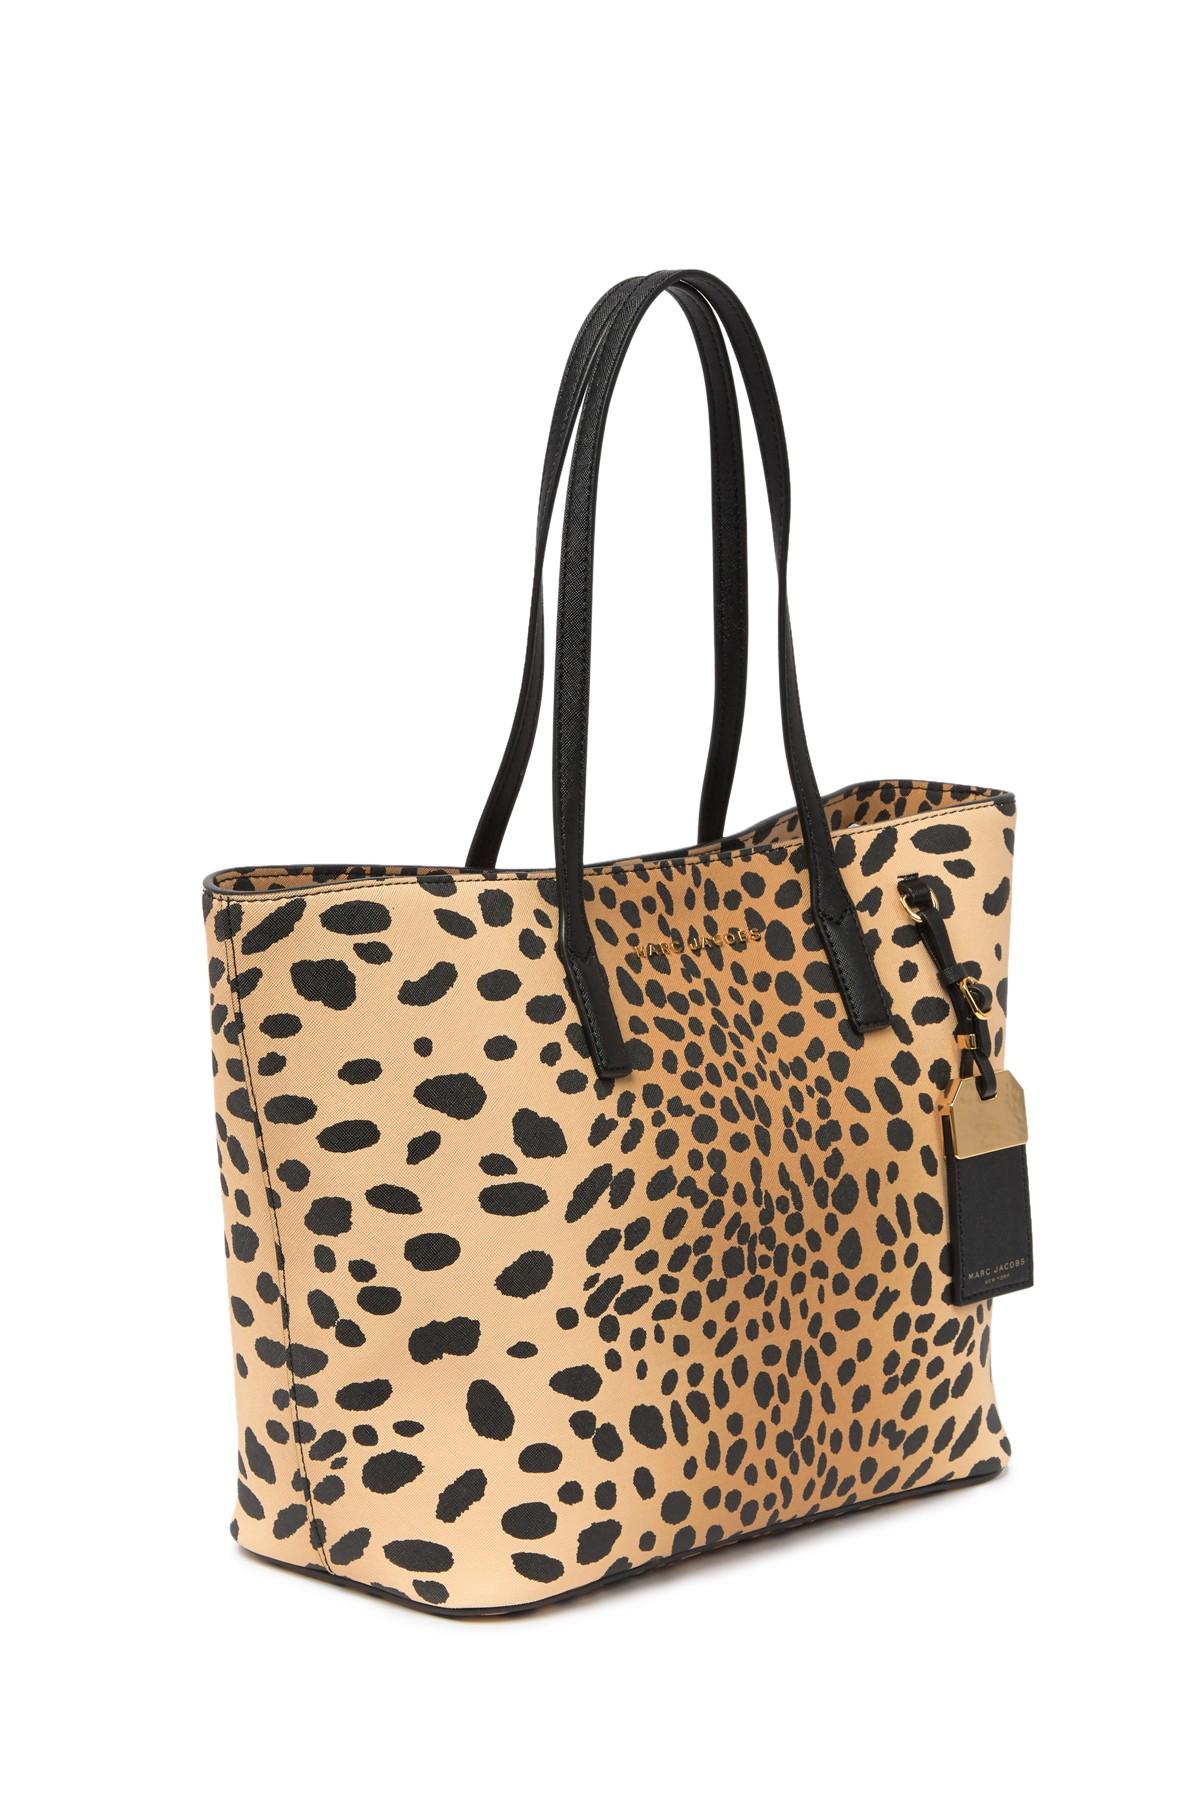 Marc Jacobs Tote Animal Print Bag Bags Purses Tote -  New Zealand